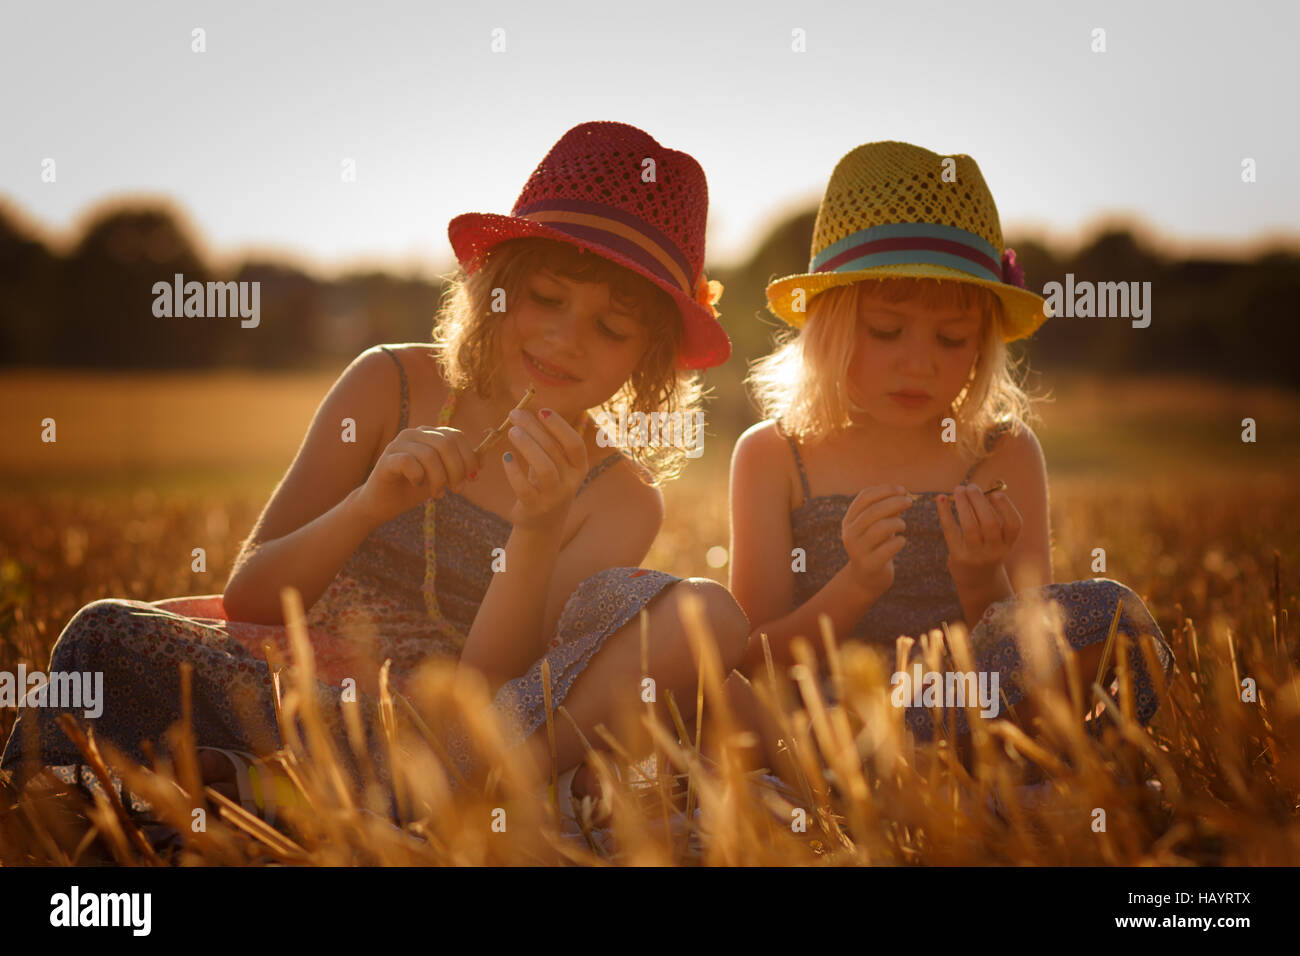 Two girls sitting in a cornfield Stock Photo